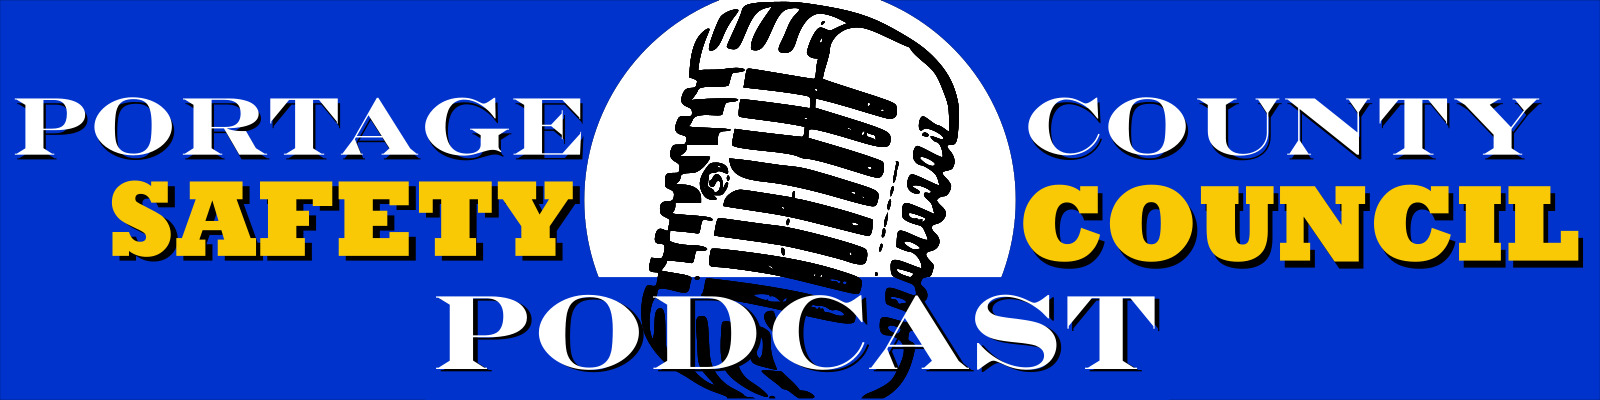 Portage County Safety Council Podcast